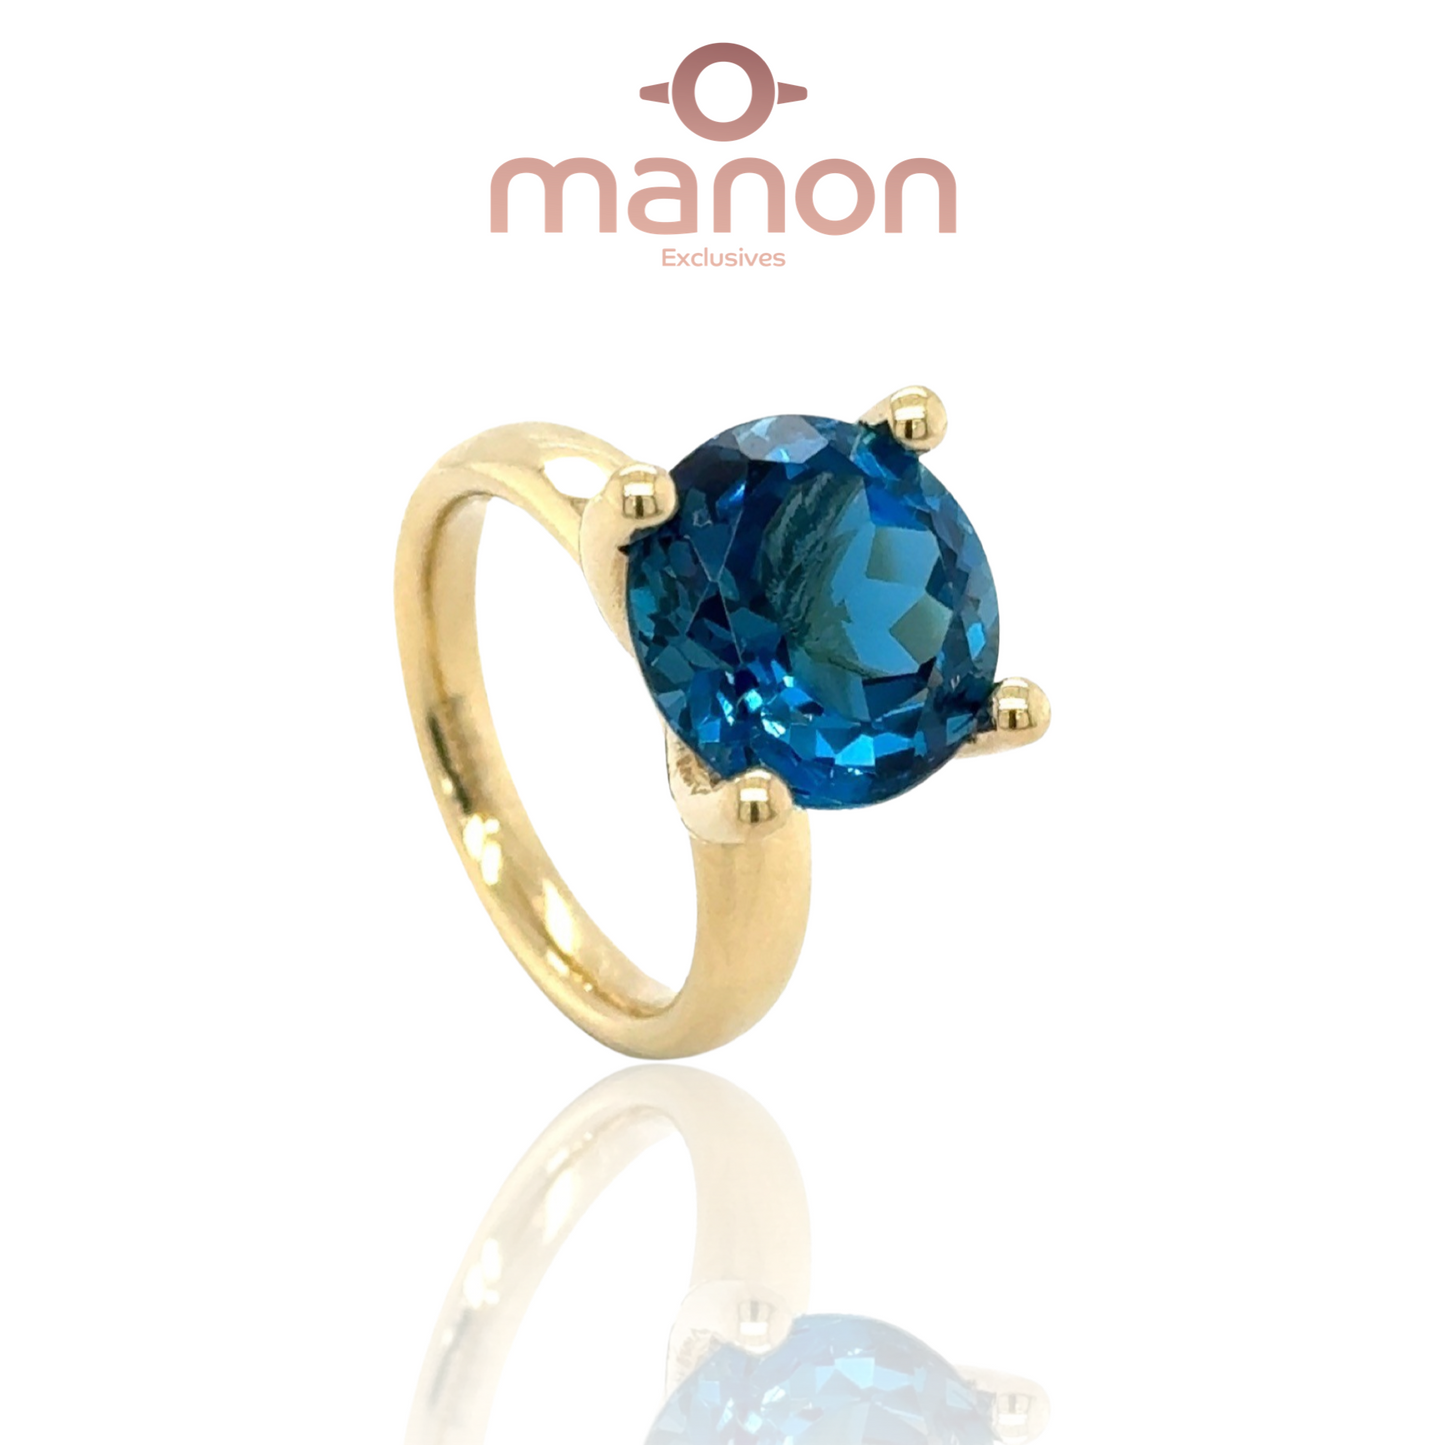 #7 Collector’s ring with London blue topaz 18k